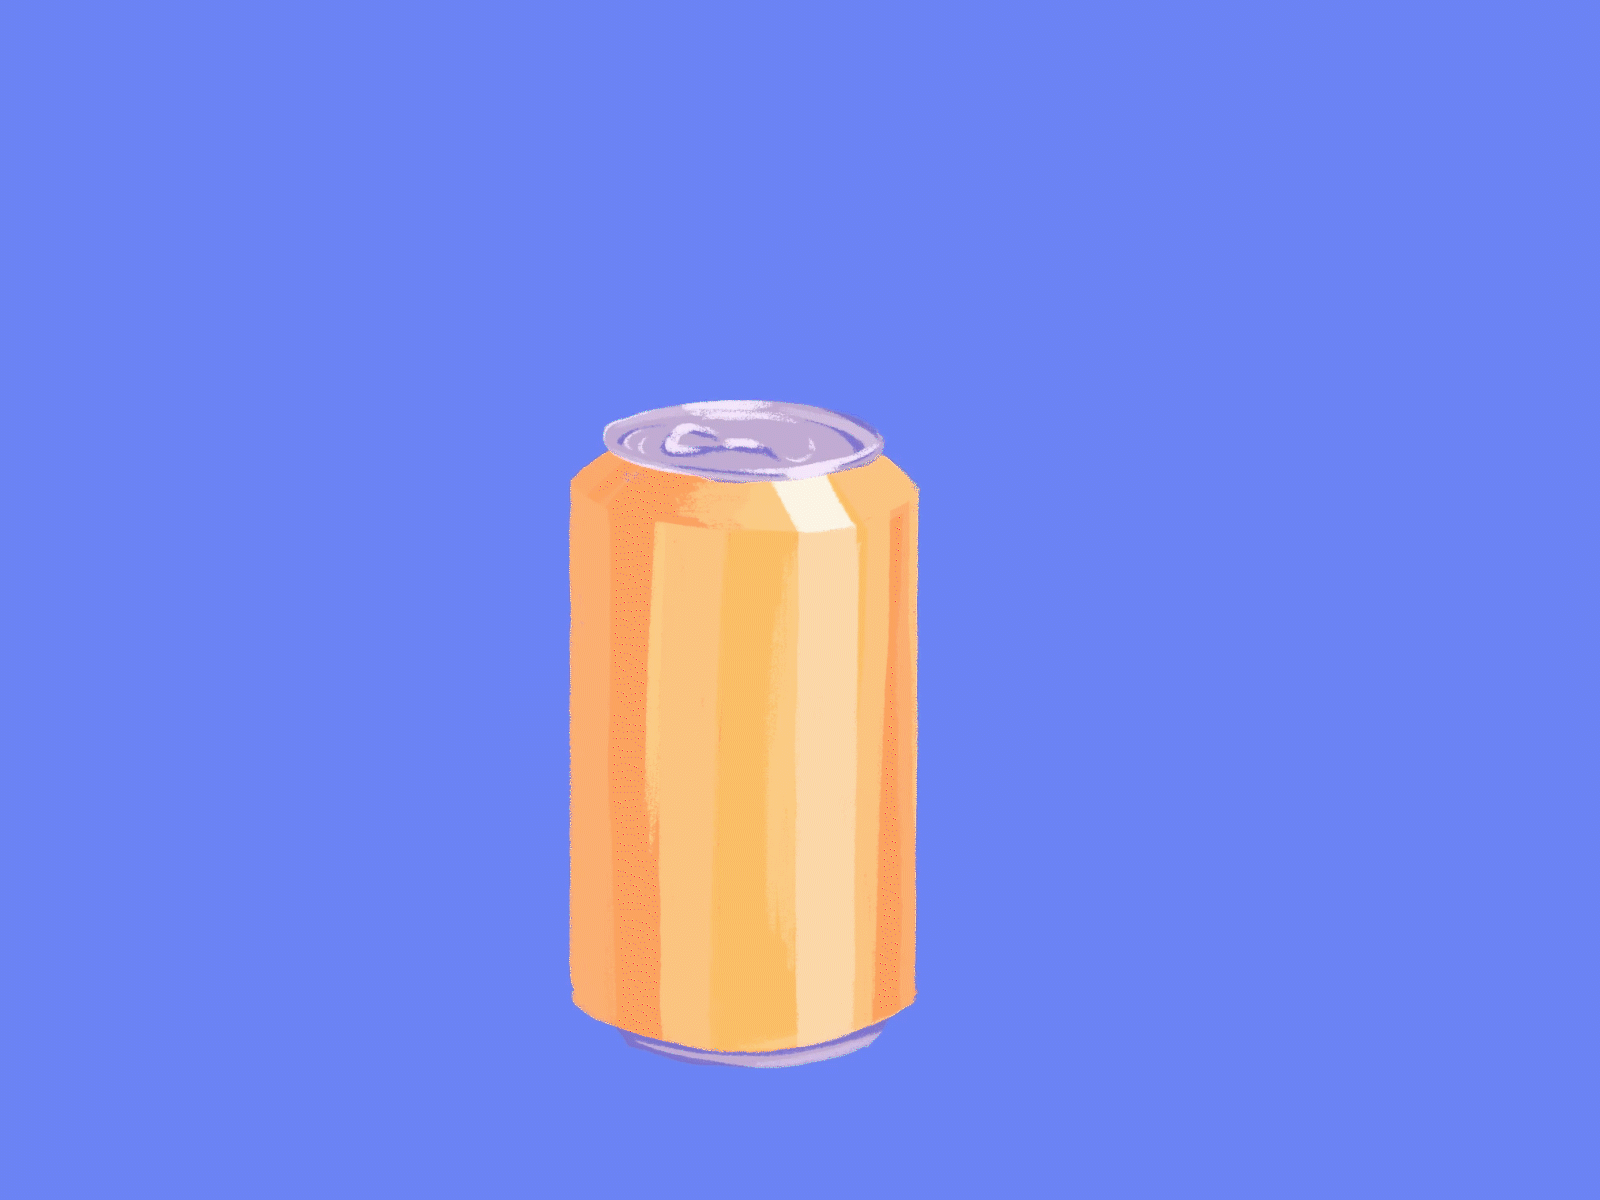 Pandora's tin can animation animation 2d beer can explosion frame by frame gif illustration motion design motion graphics new year pop soda